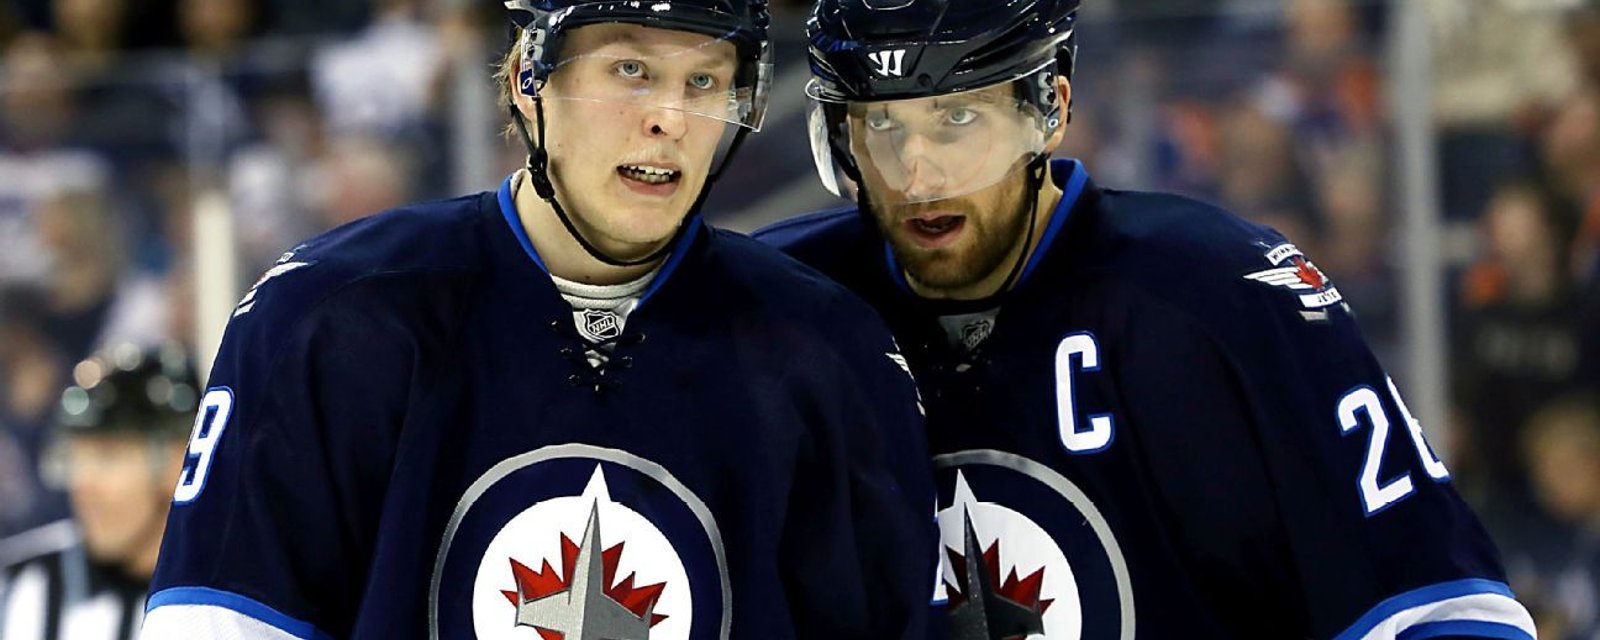 Jets’ captain Wheeler responds to Laine’s comments during contract standoff